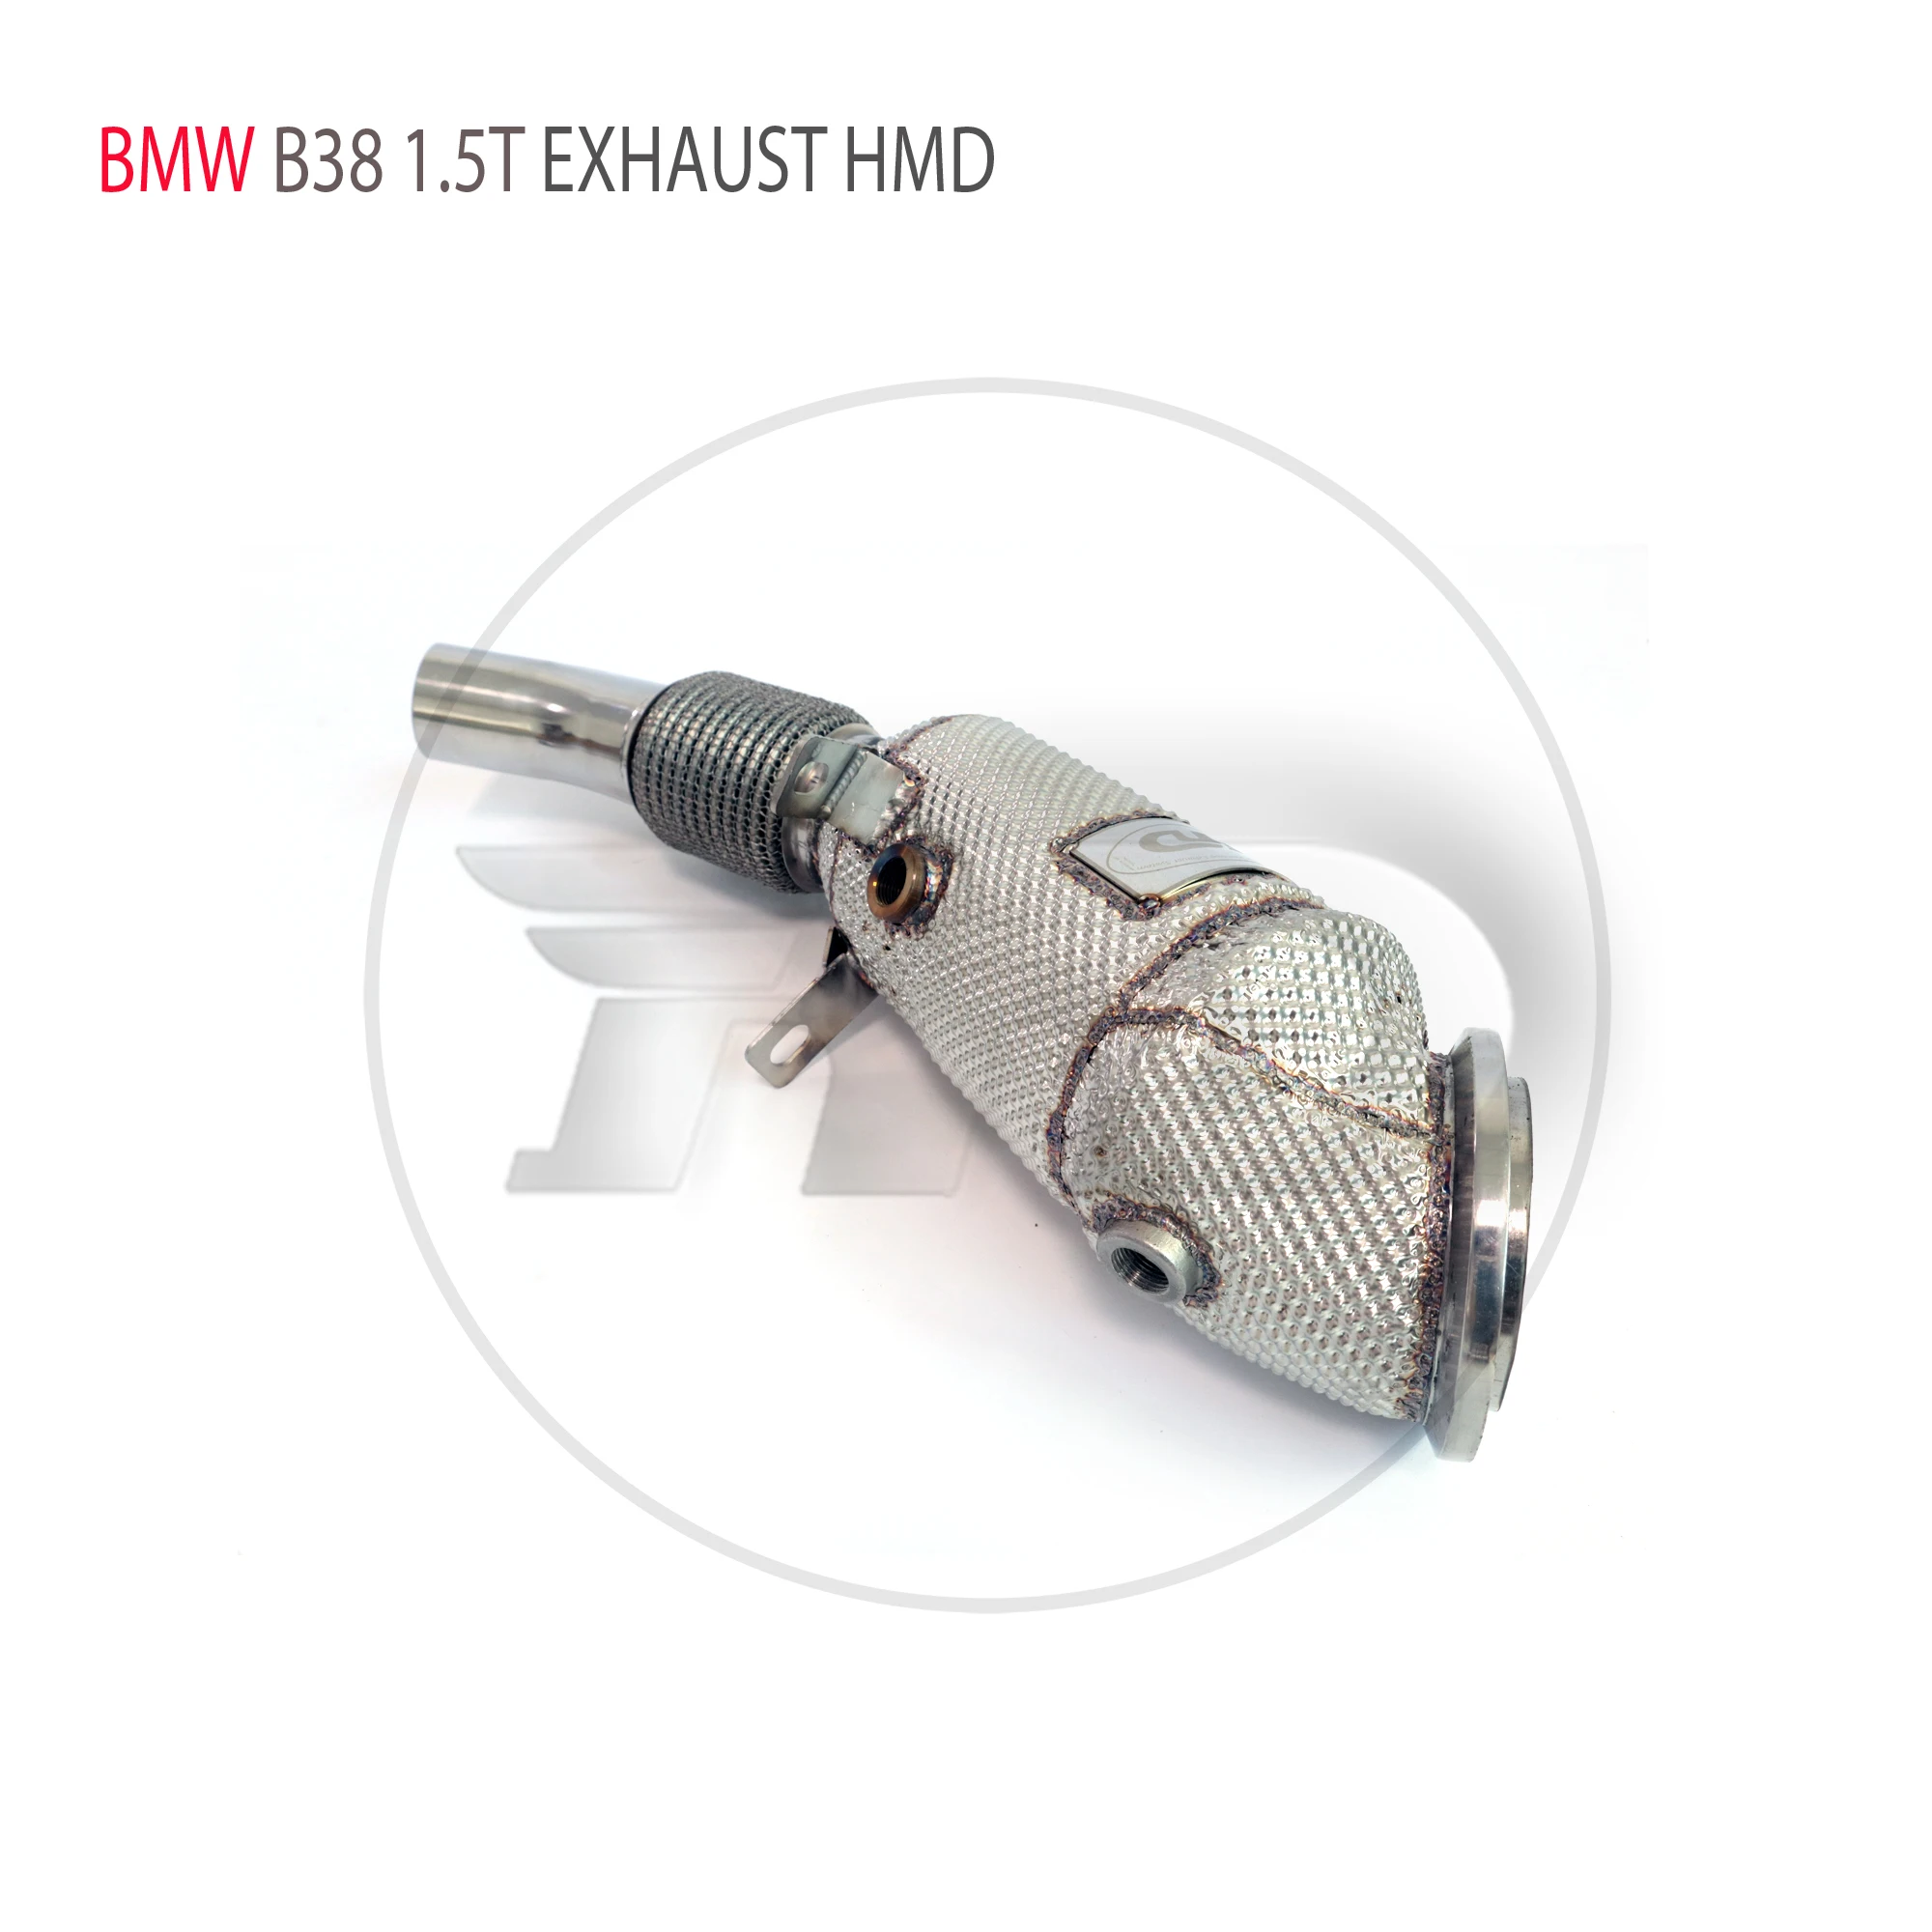 

HMD Exhaust System High Flow Performance Downpipe for BMW 218i 220i F22 F23 B38 Engine 1.5T Catalyst Converter Header